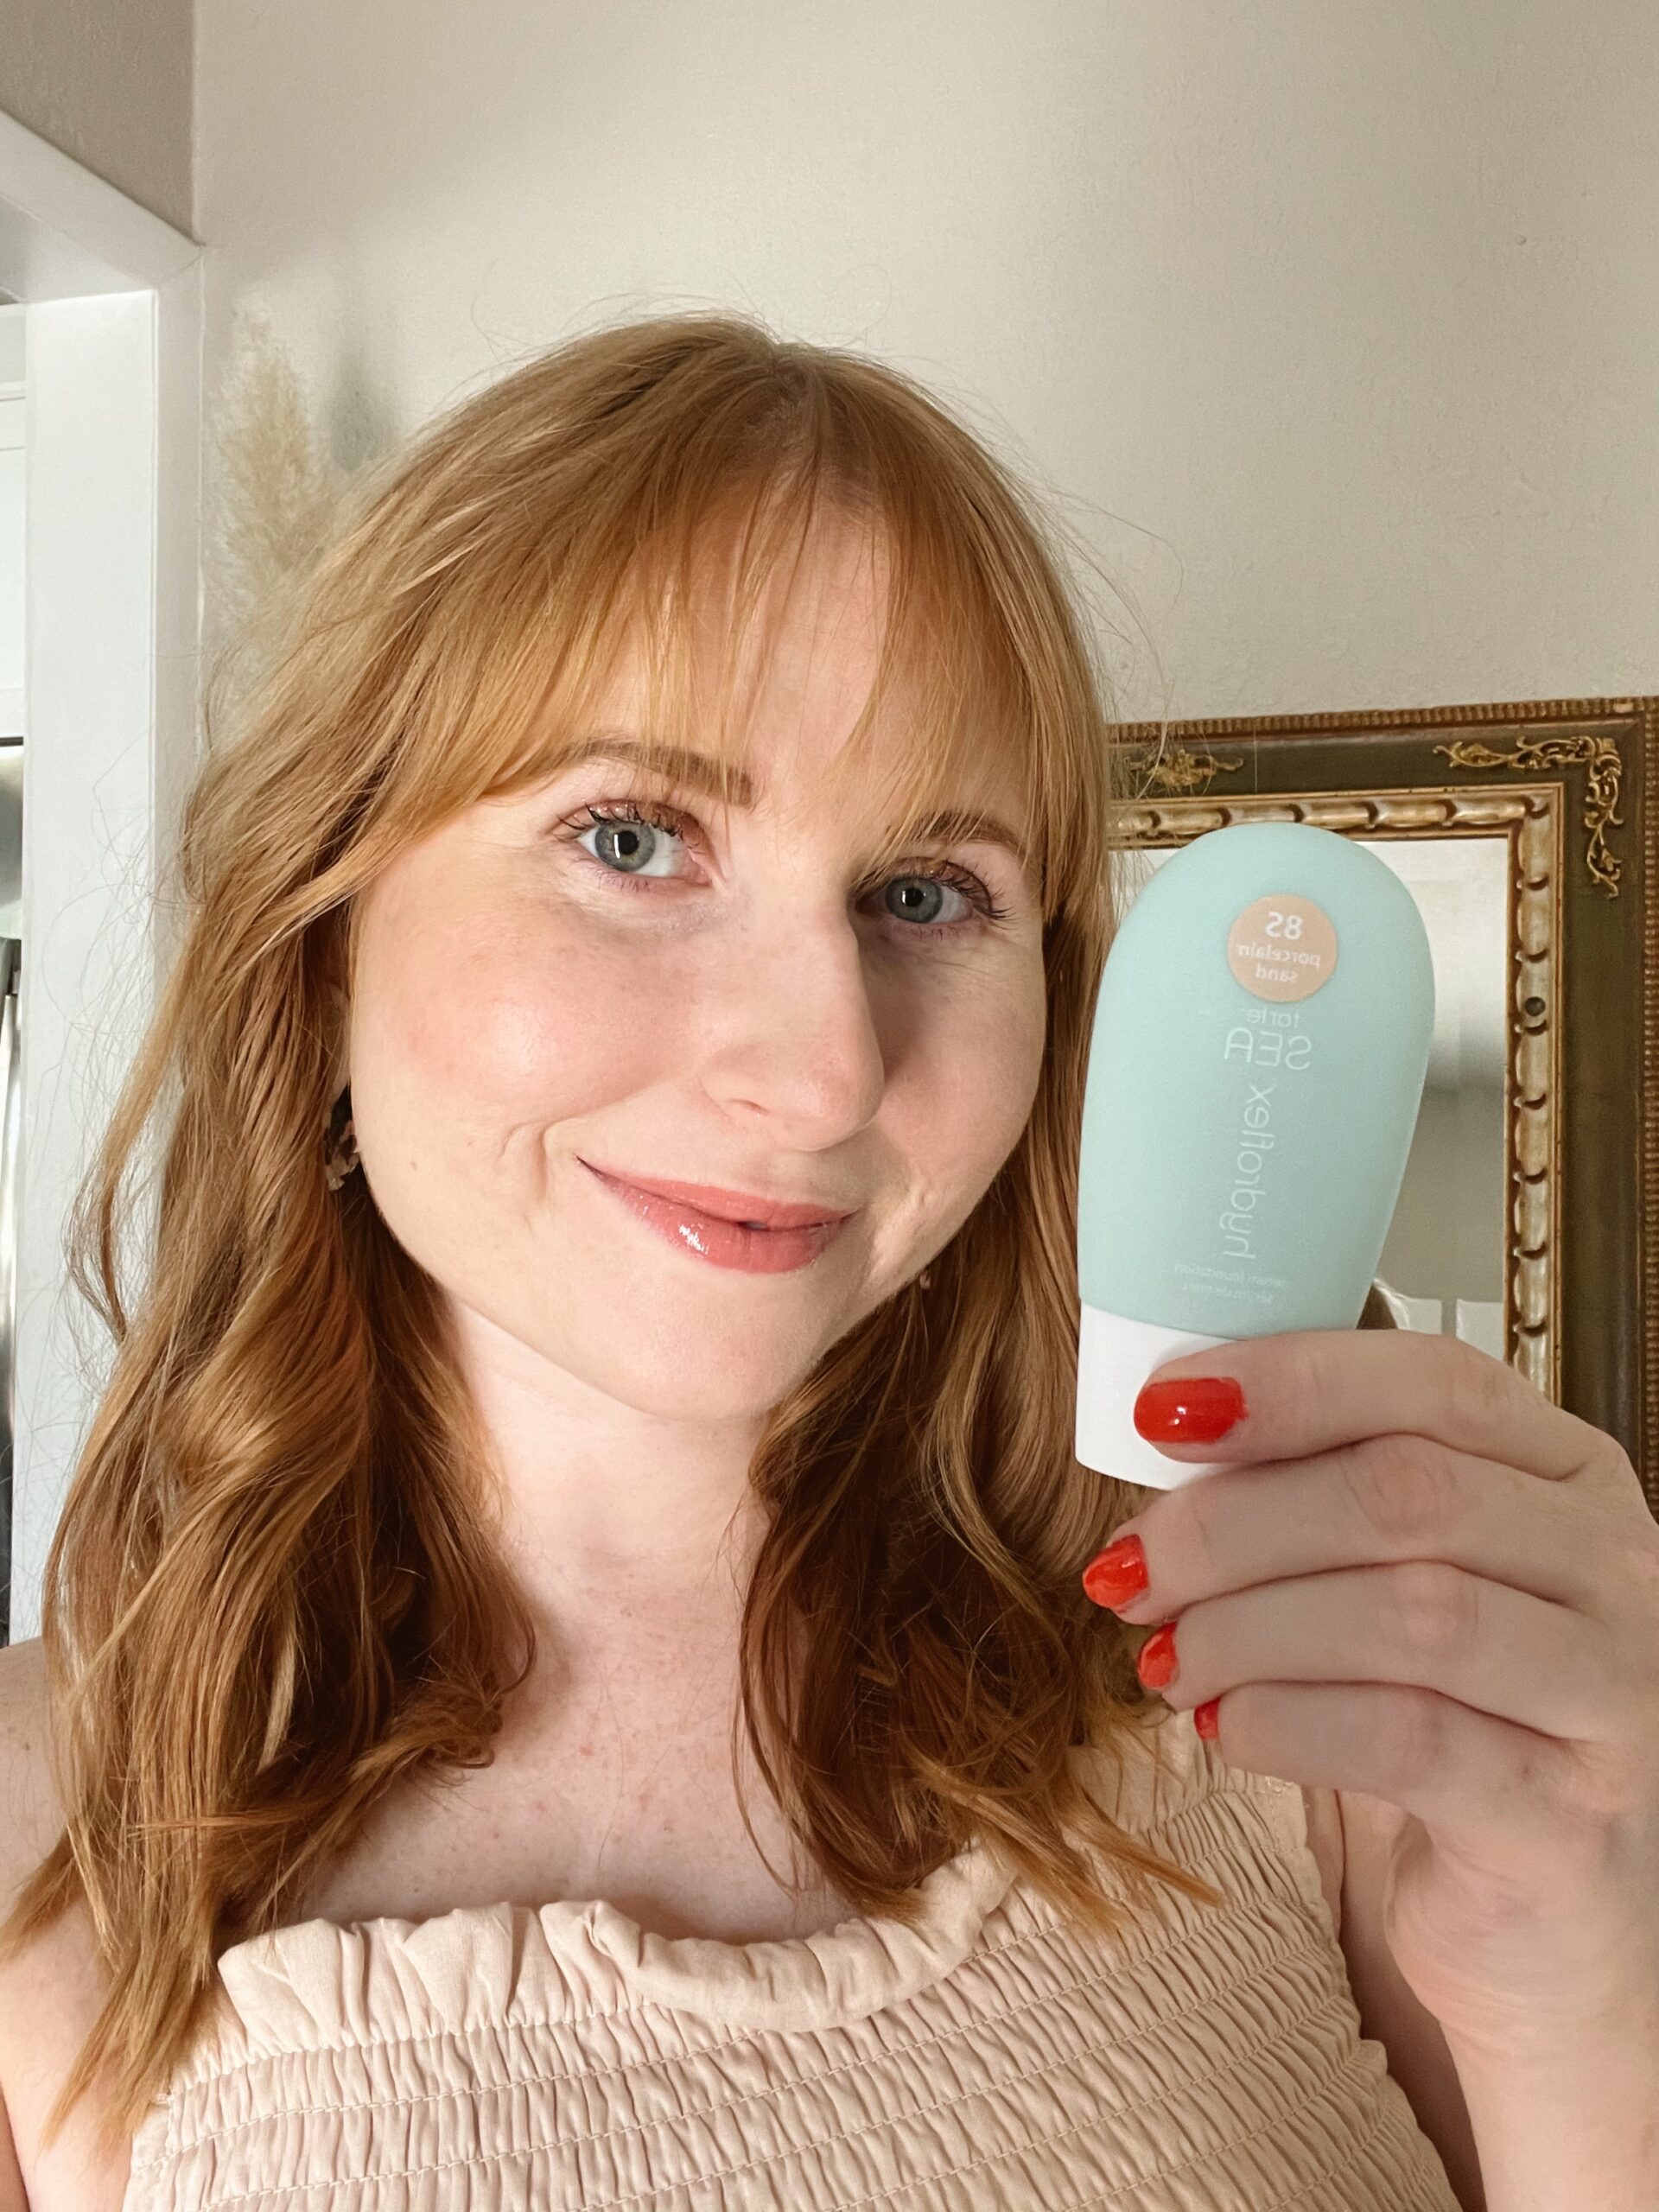 tarte HydroFlex Serum Foundation and Blending Brush | My Current Makeup Routine - Affordable by Amanda